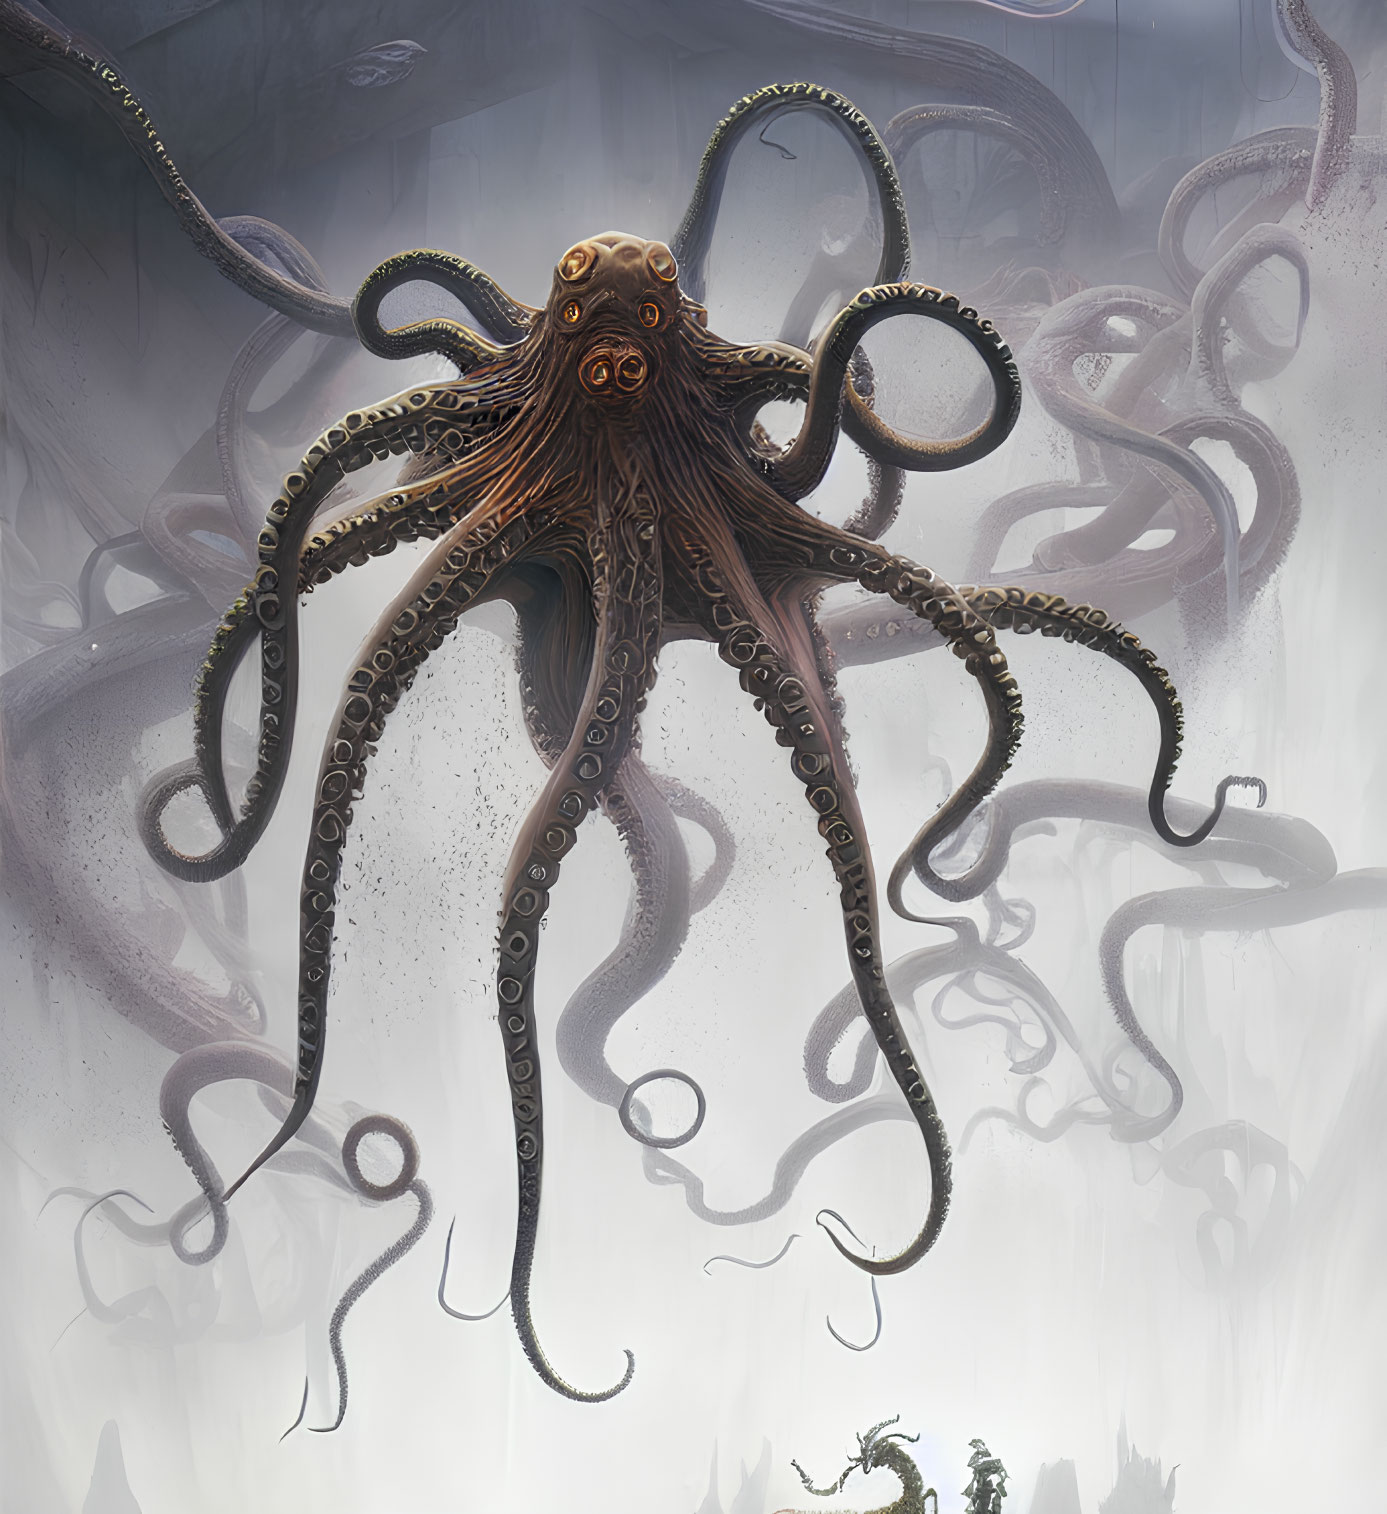 Detailed Illustration: Giant Octopus with Intricate Tentacle Patterns in Ominous Underwater Setting